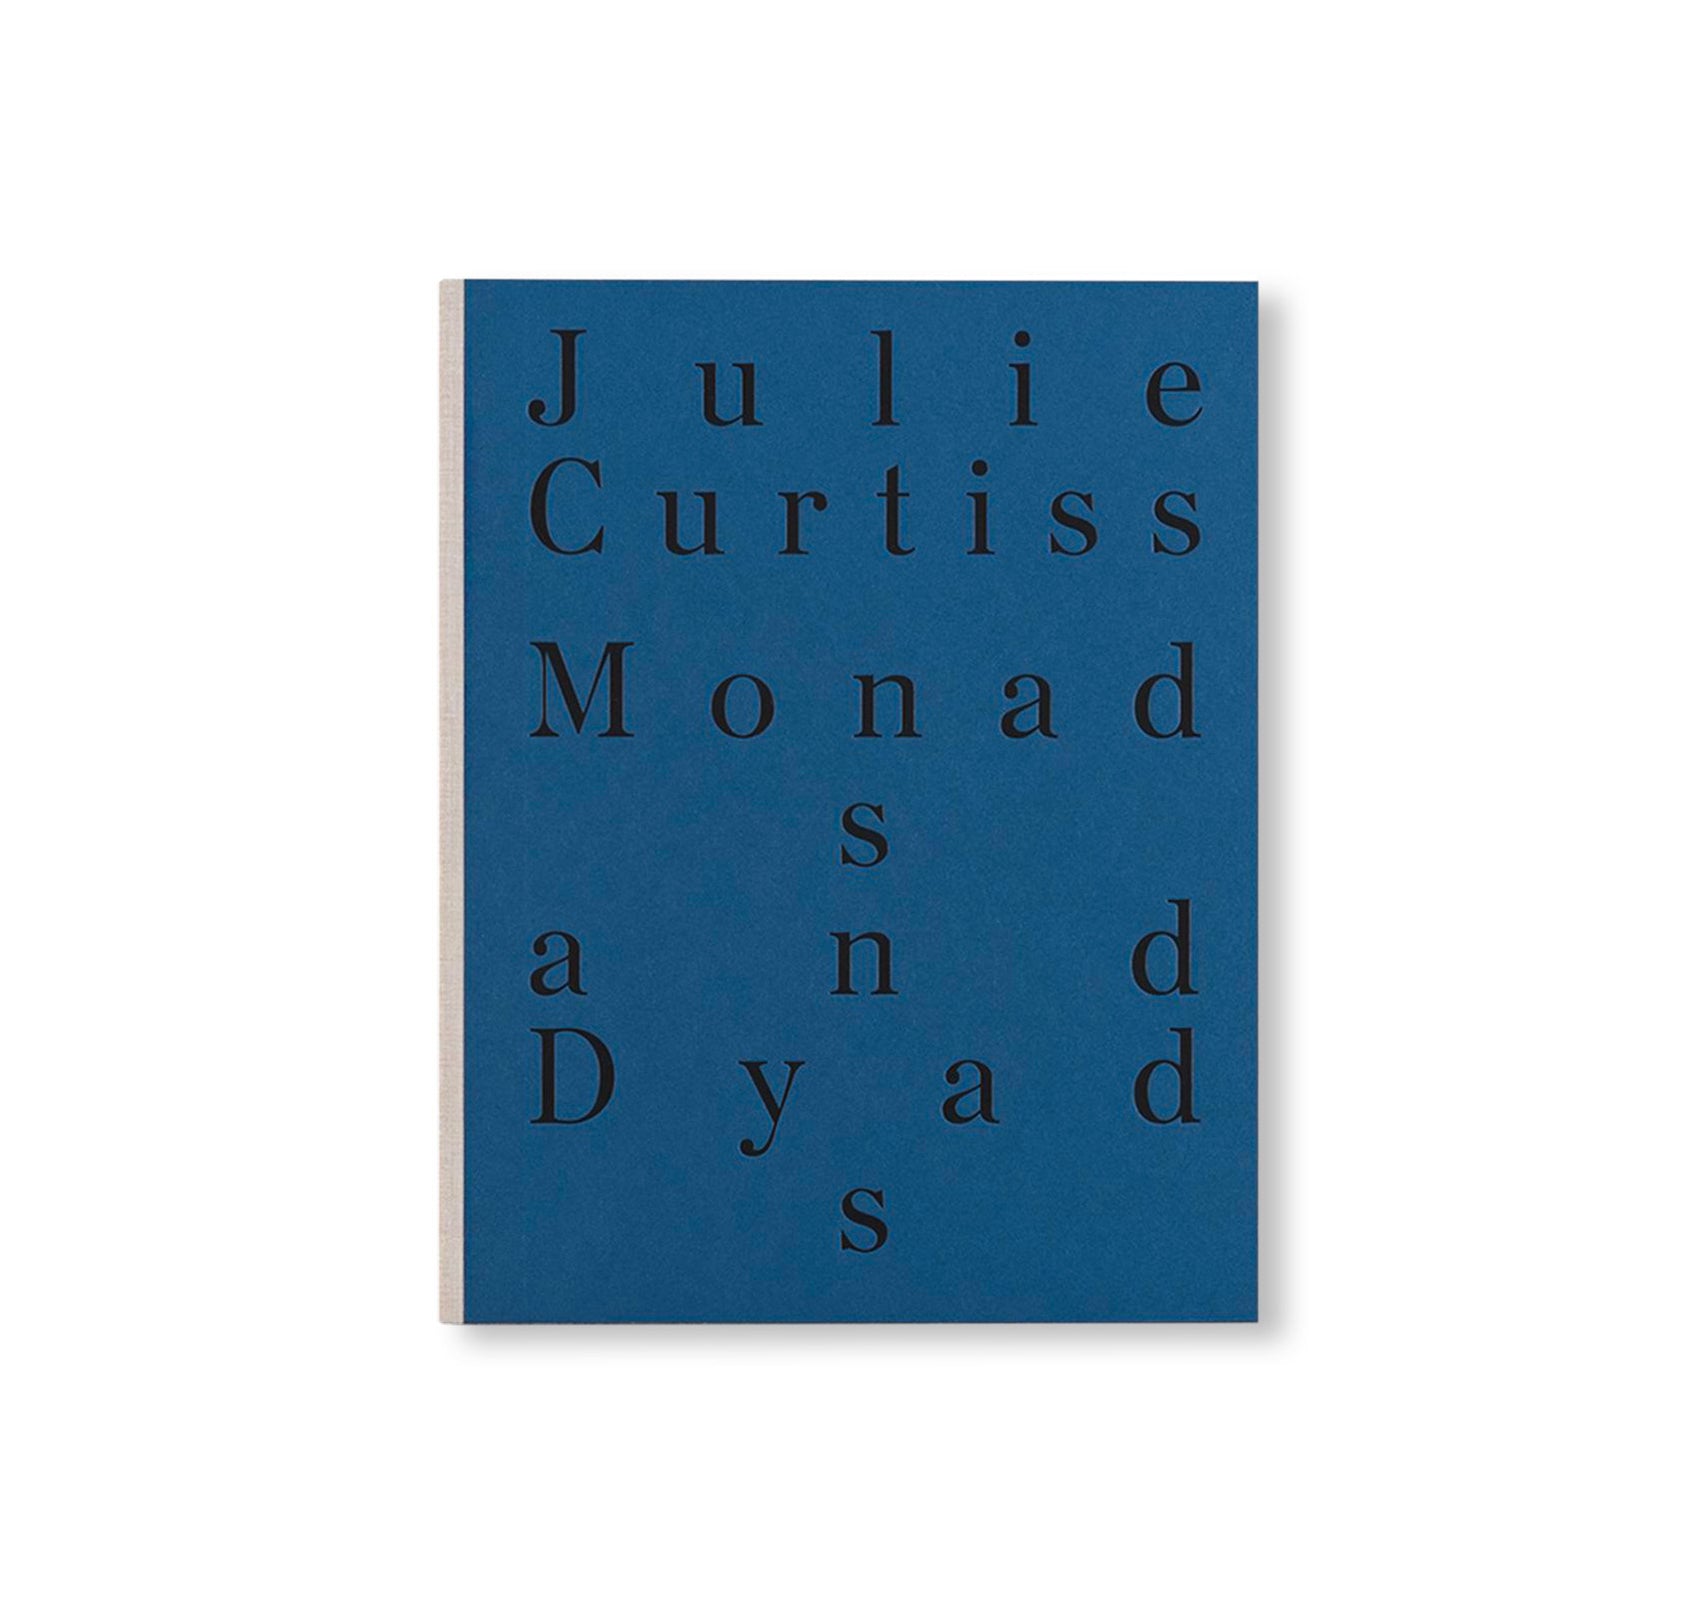 MONADS AND DYADS by Julie Curtiss